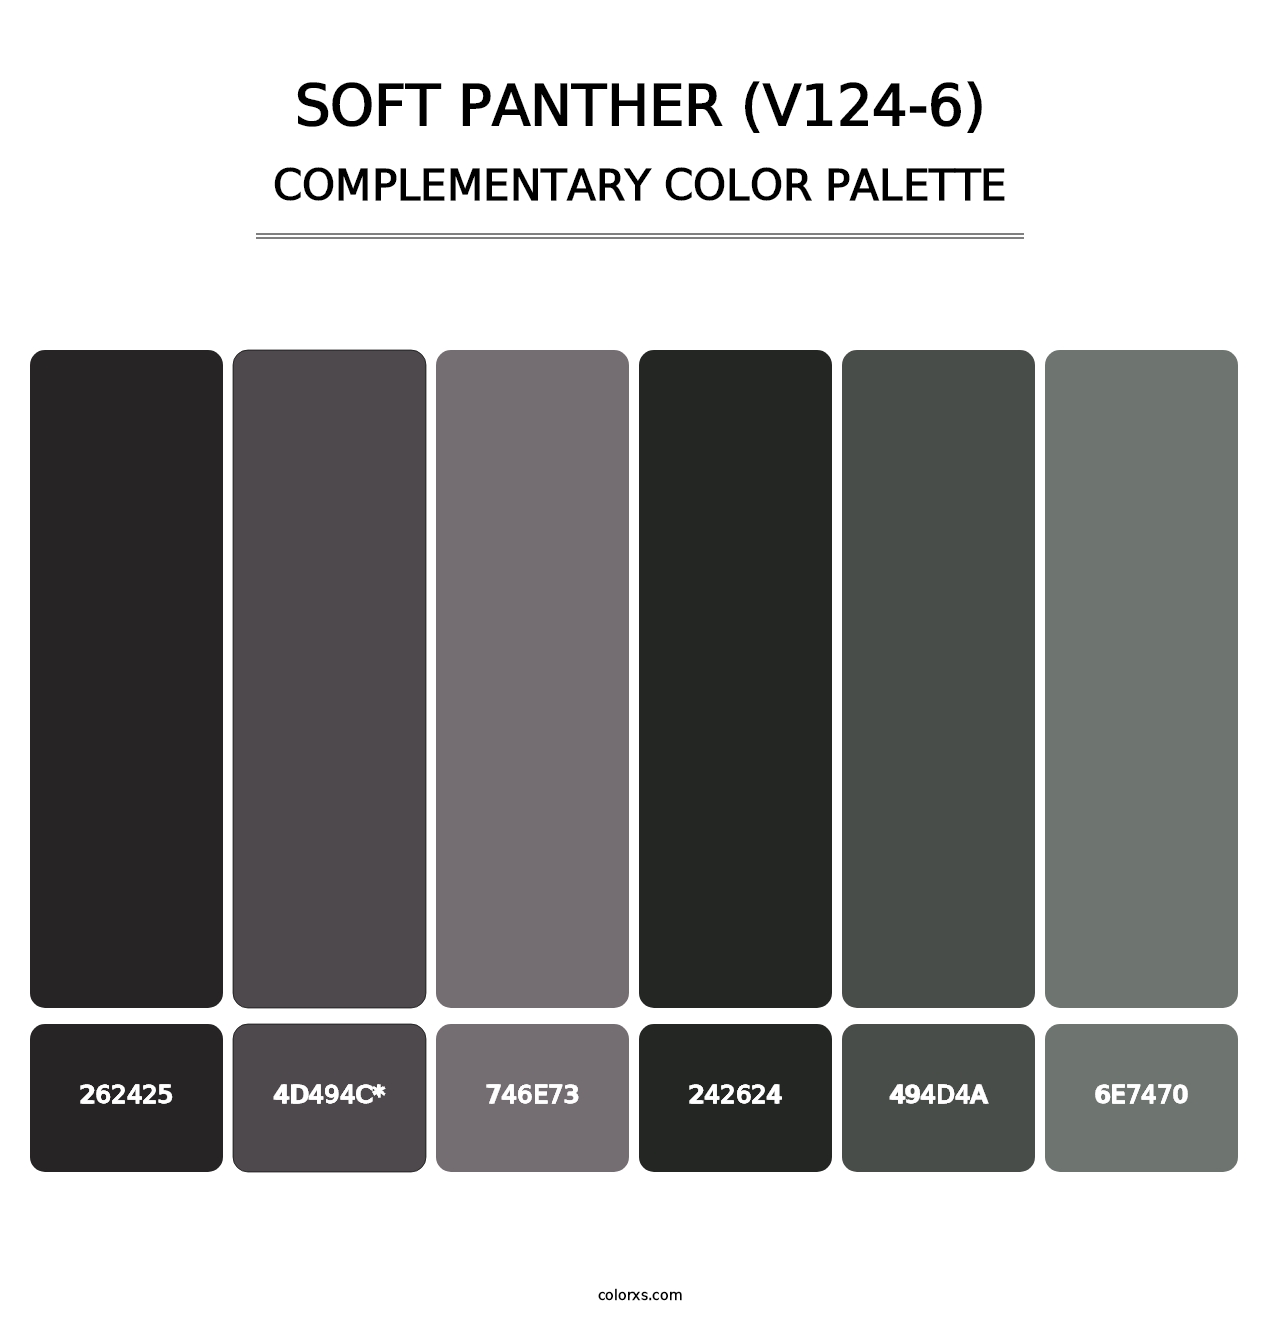 Soft Panther (V124-6) - Complementary Color Palette